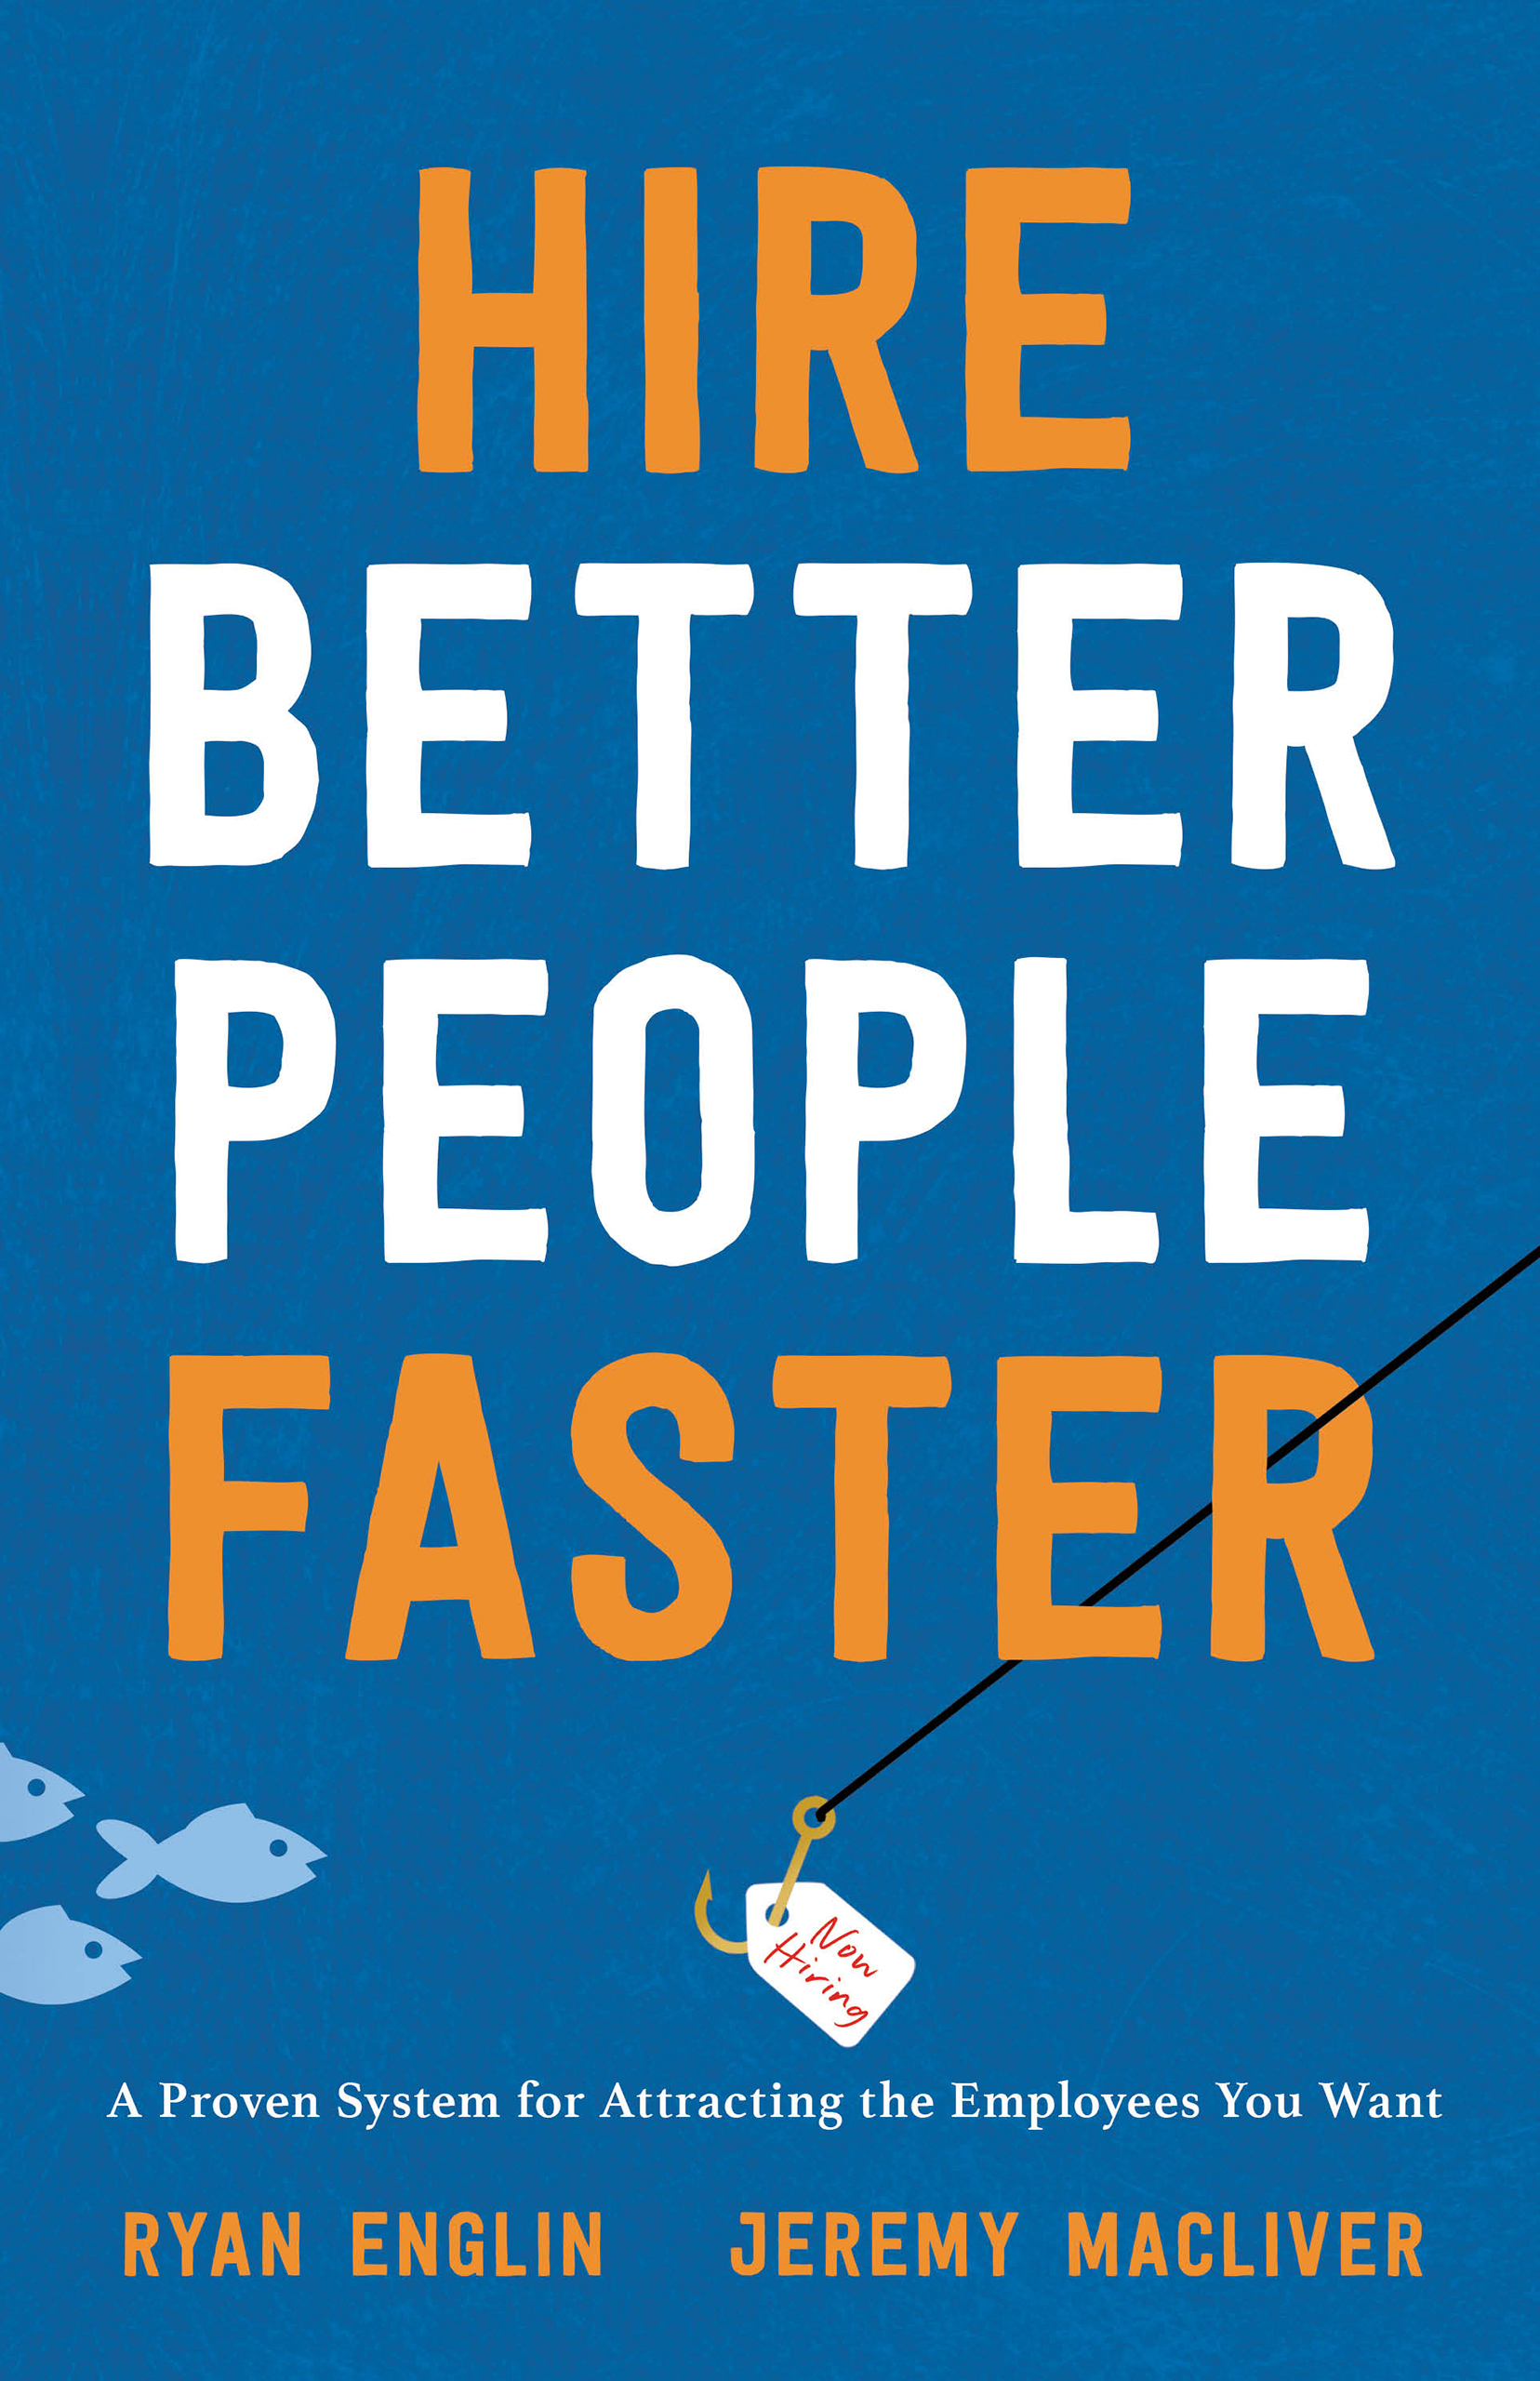 Hire Better People Faster